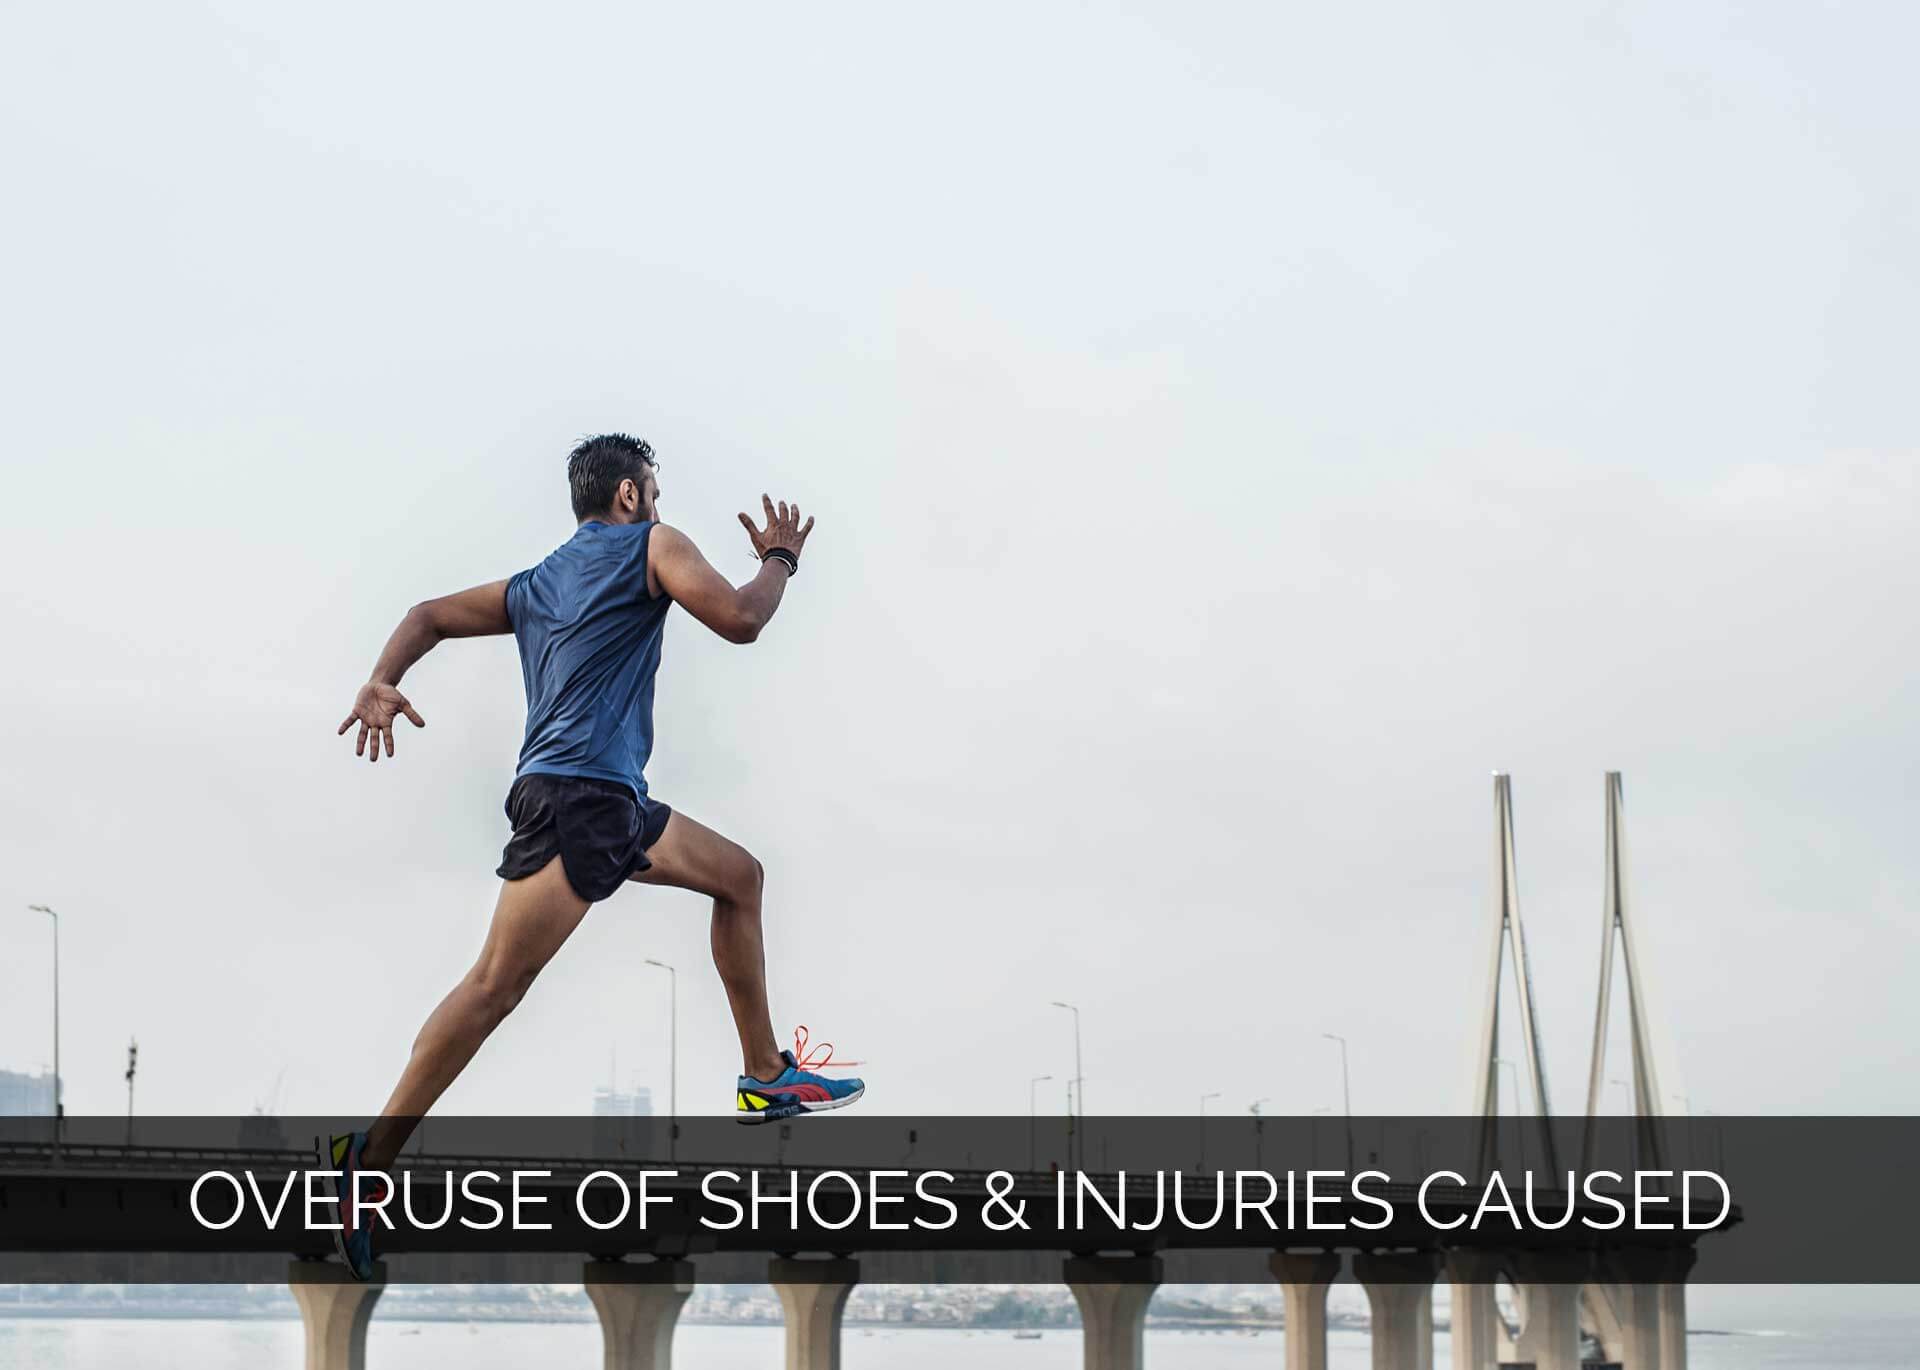 Does overuse of running shoes cause injury? 5 common foot injuries from running.